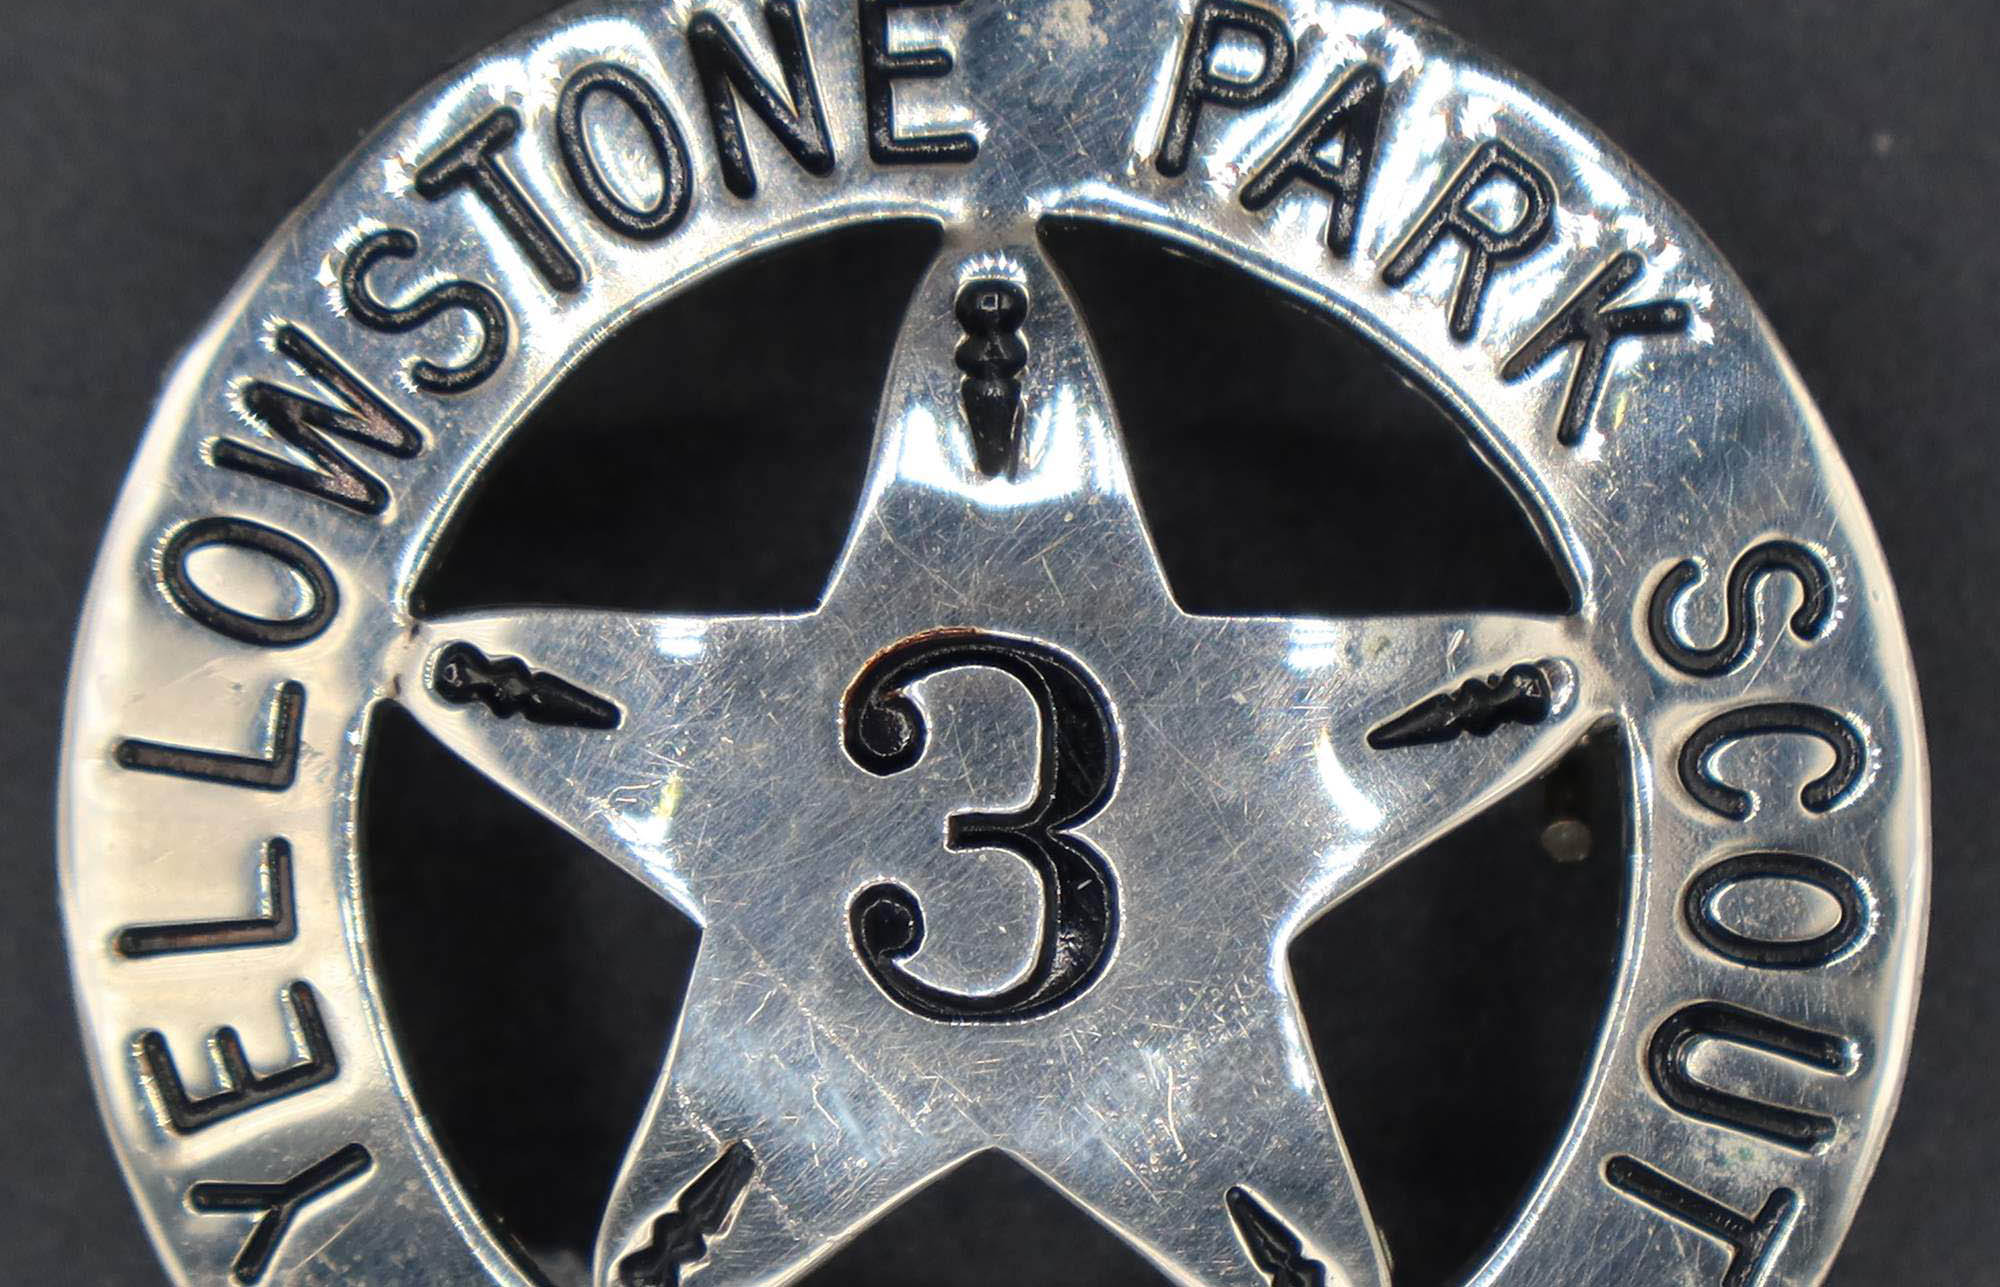 Round silver badge with a central five-point star marked with the number 3. The rim is marked Yellowstone park scout.